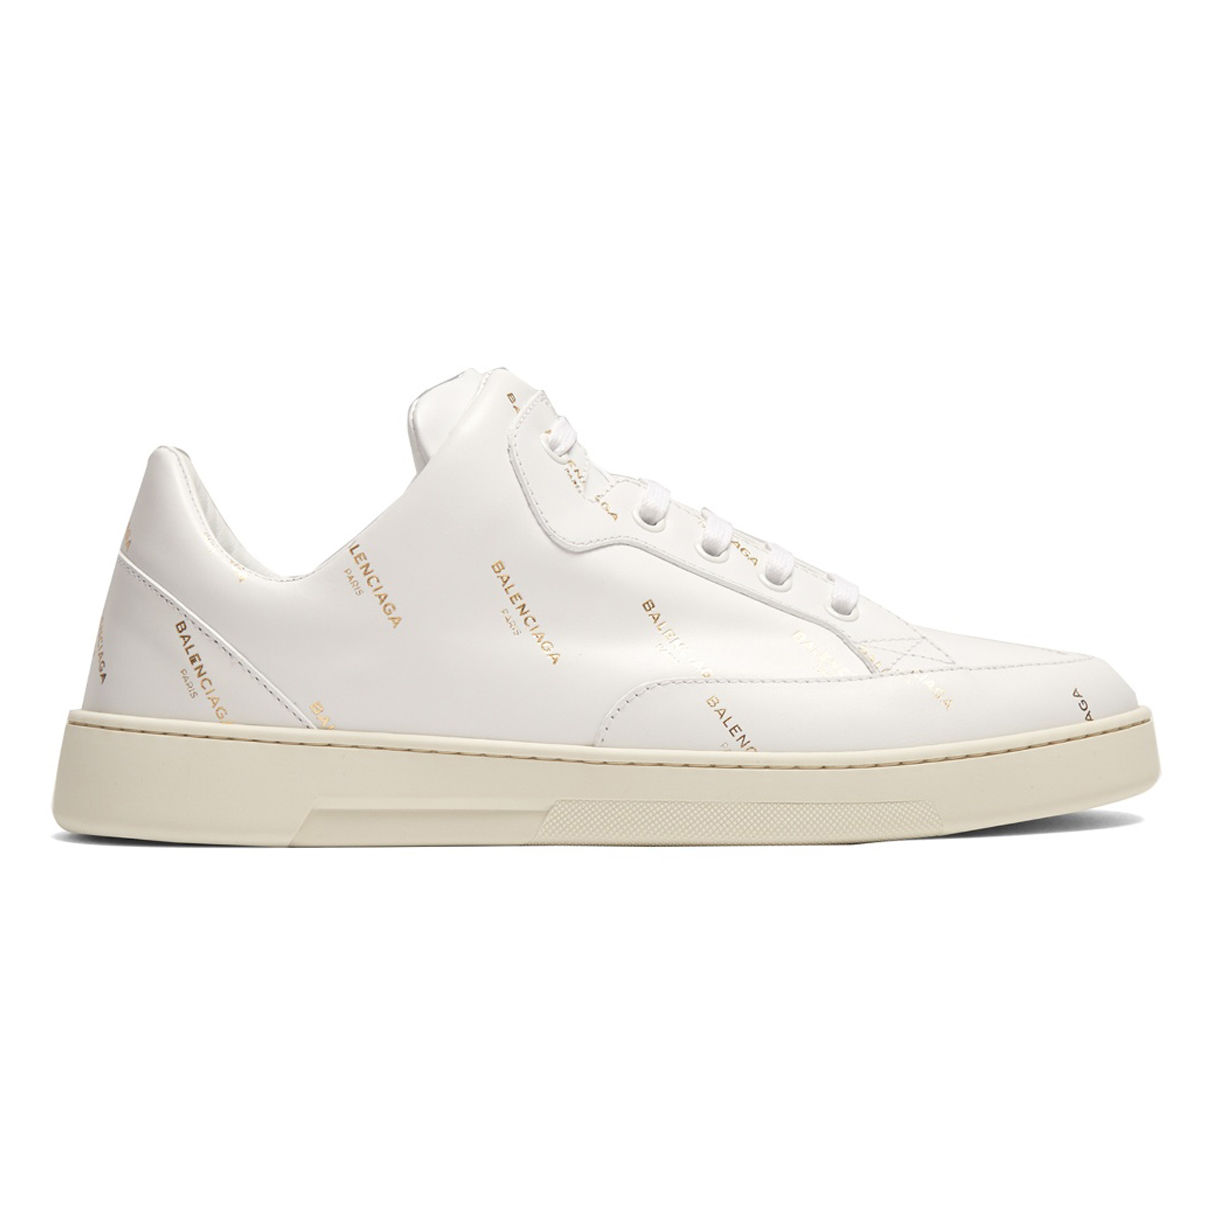 Wimbledon-worthy: 5 all-white sneakers to up your shoe game | Lifestyle ...